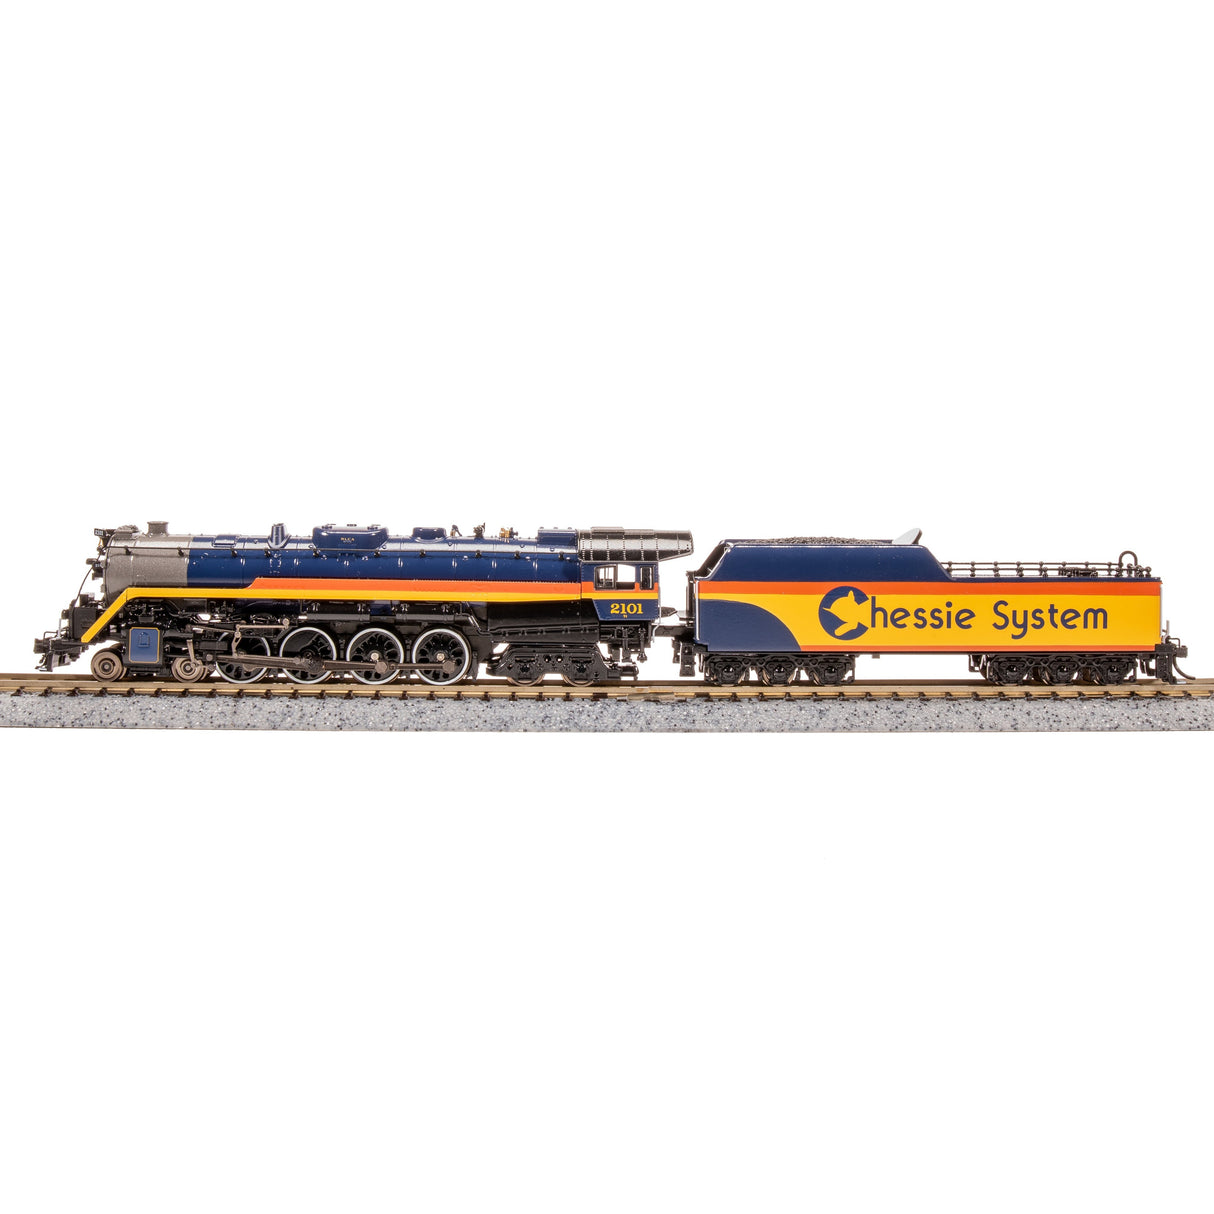 Broadway Limited N Scale Reading T-1 4-8-4 Steam Locomotive #2101/Chessie Steam Southern Pacificecial DC